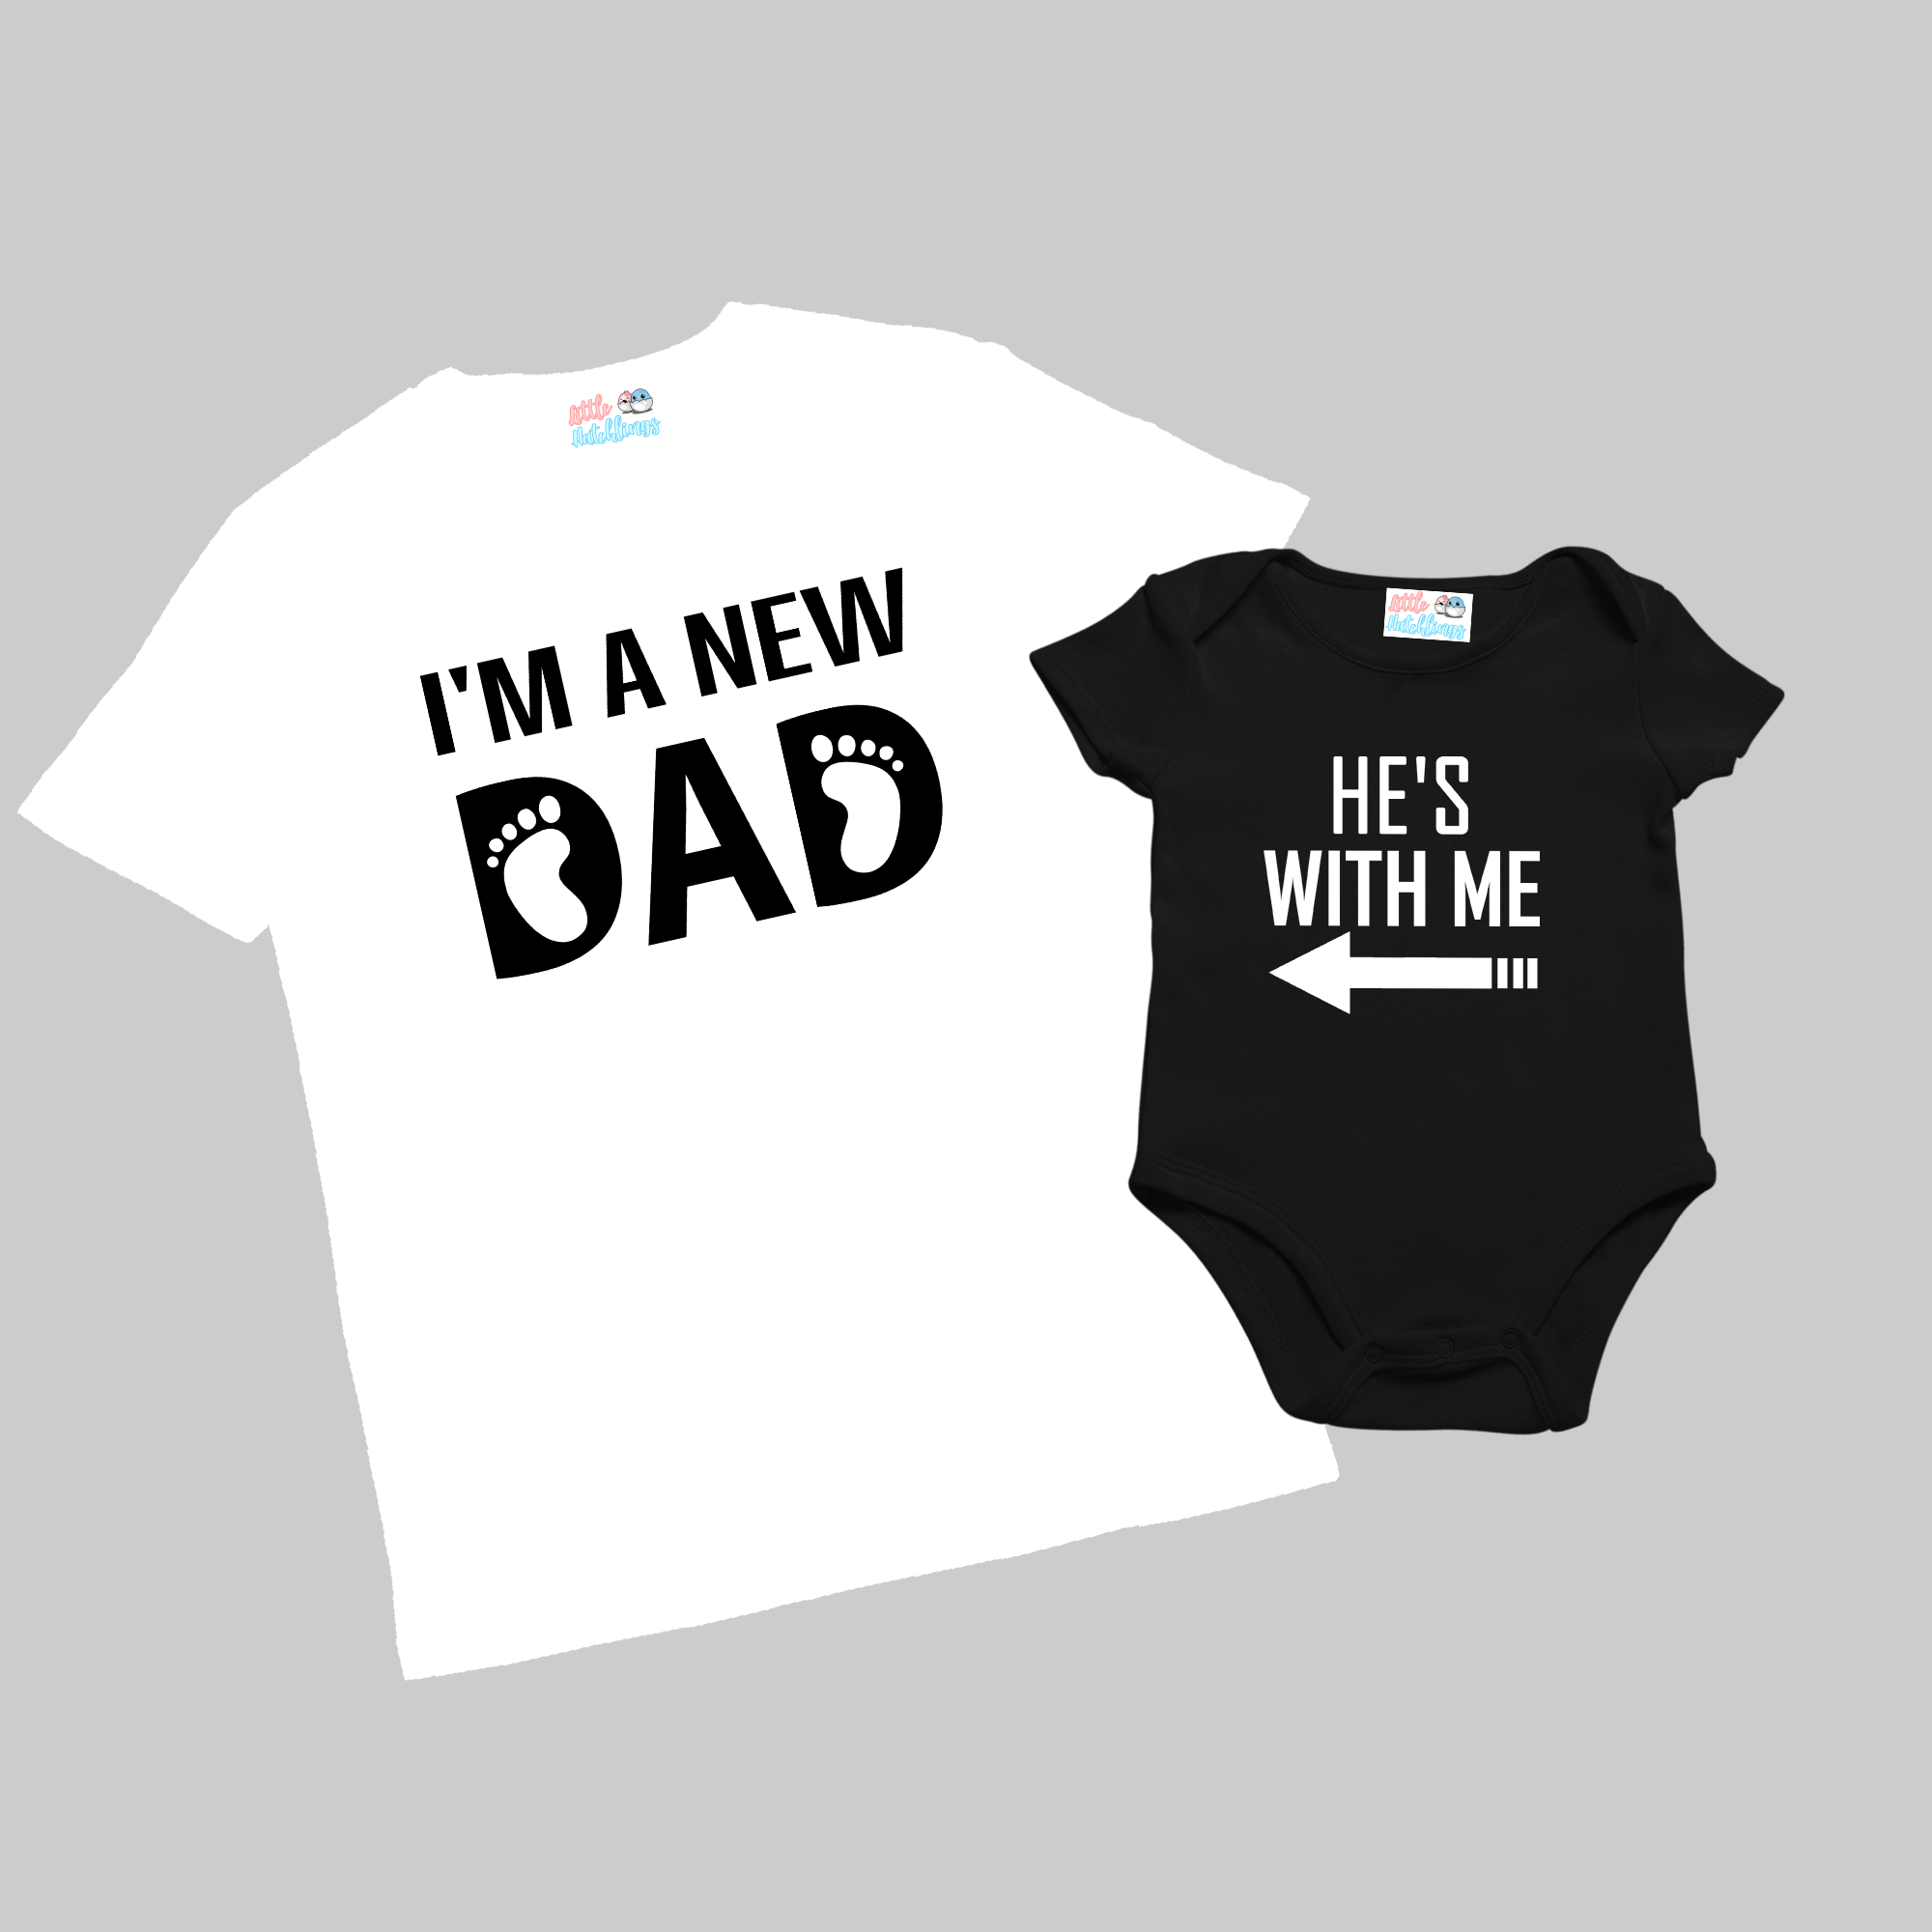 New Dad + He is with Me White and Black Combo- Onesie + Adult T-shirt